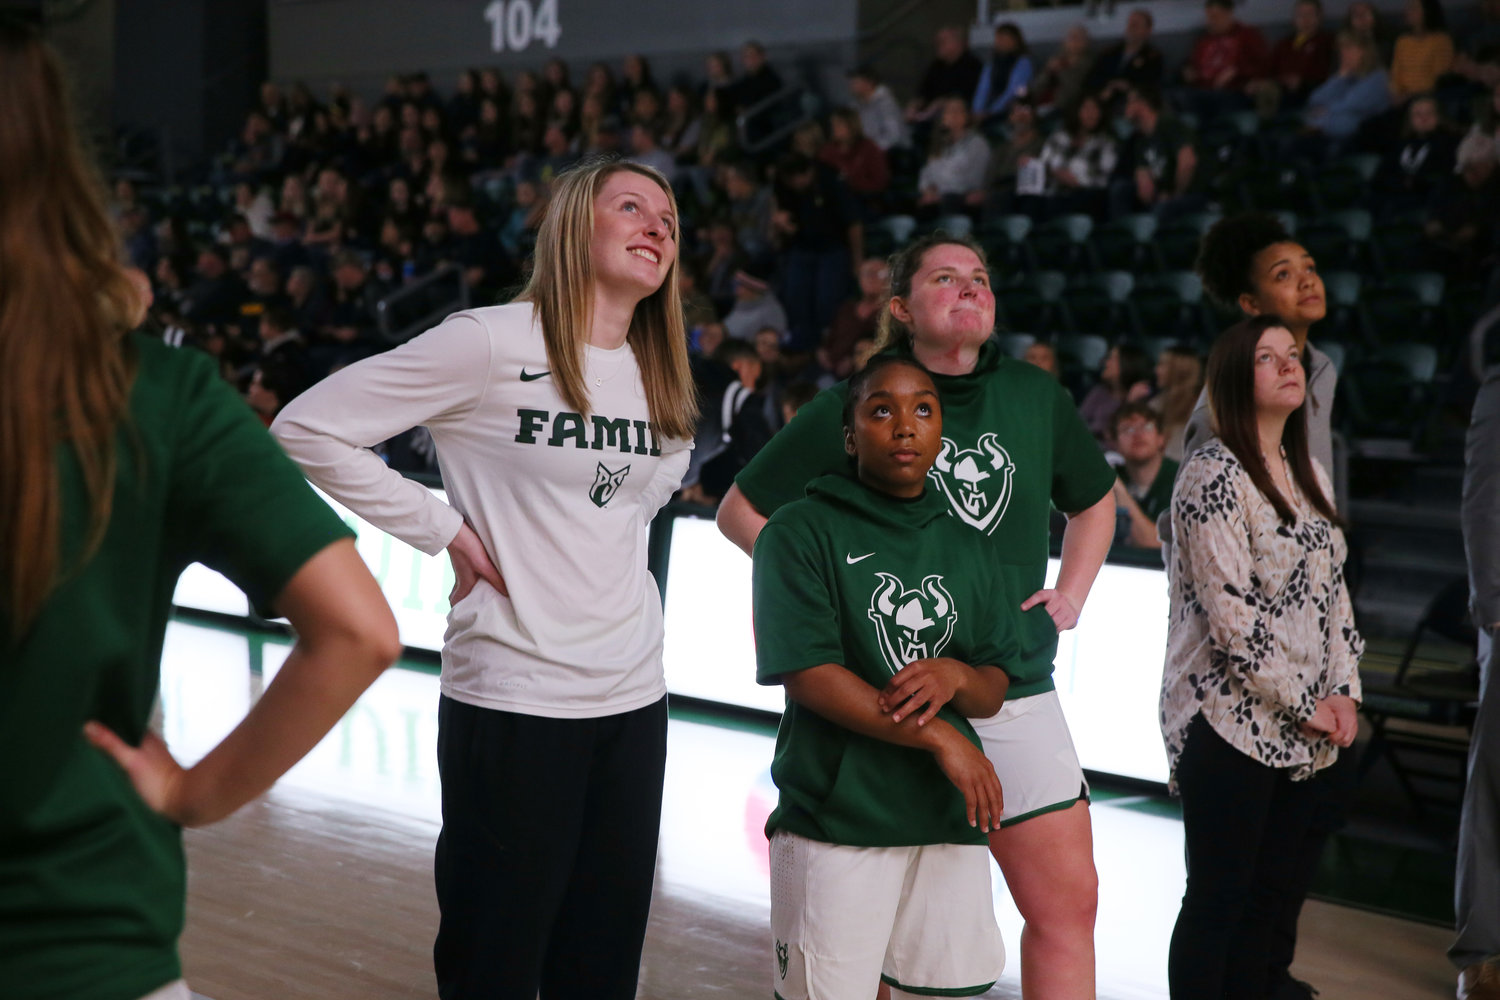 Erika Brumfield, on the left in the white shirt, during a pregame for Portland State University women’s basketball in spring 2020. Brumfield announced her transfer to Central Washington University on Aug. 19.